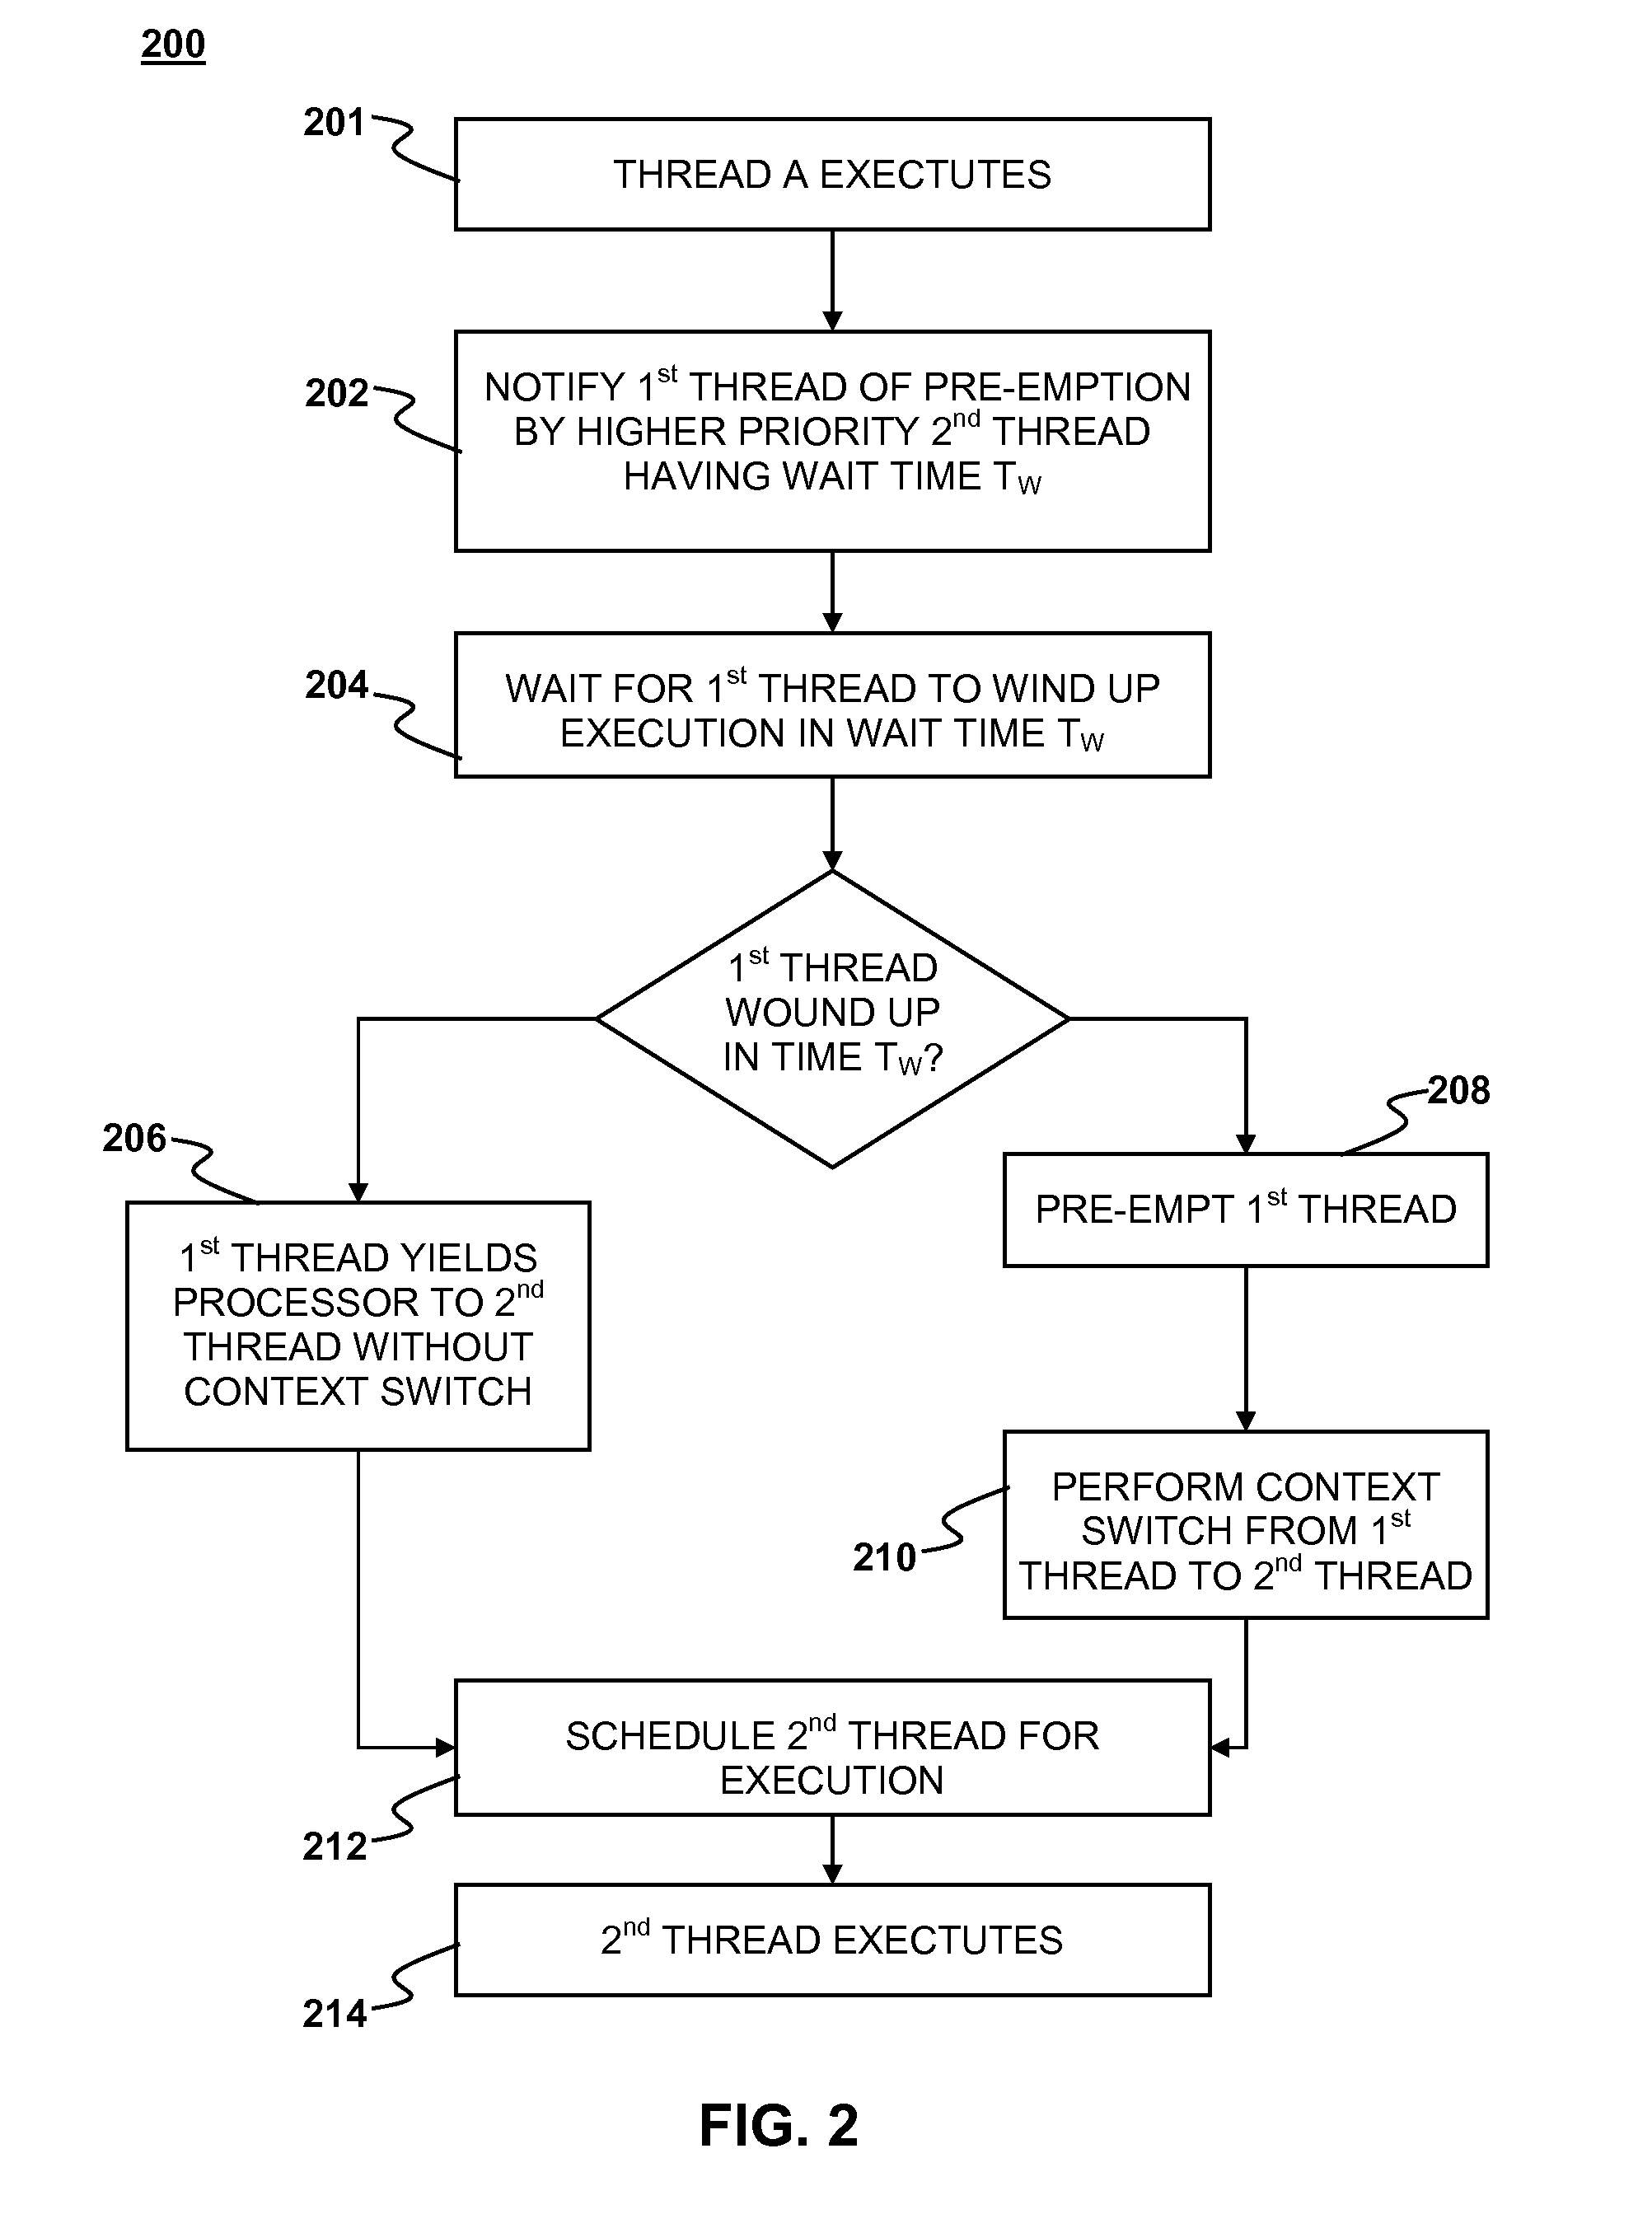 Multi-threaded processing with reduced context switching